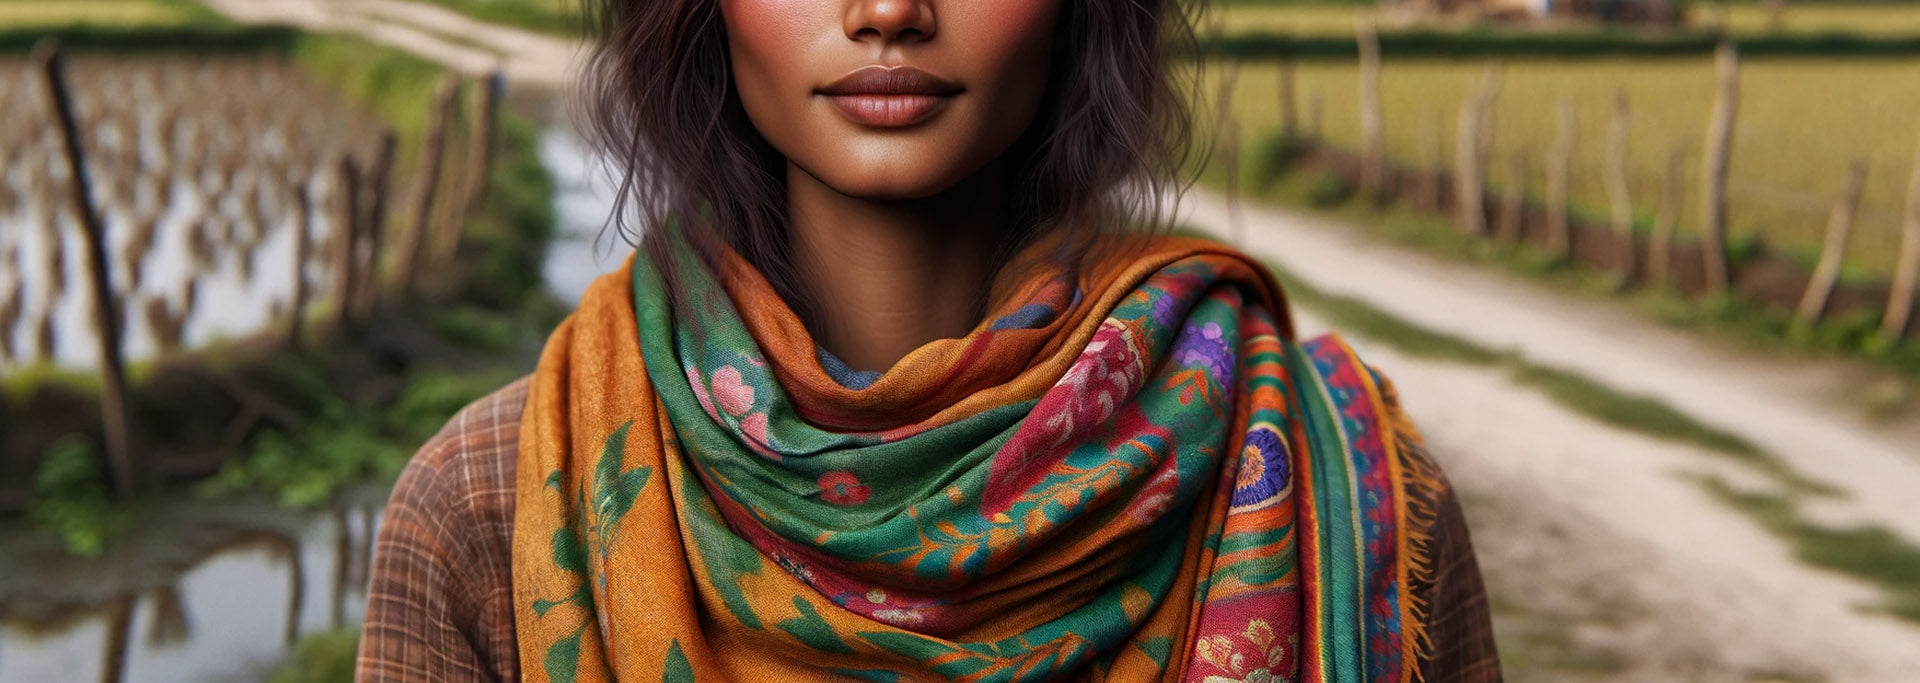 ethnic Indian girl wearing hand painted wrap